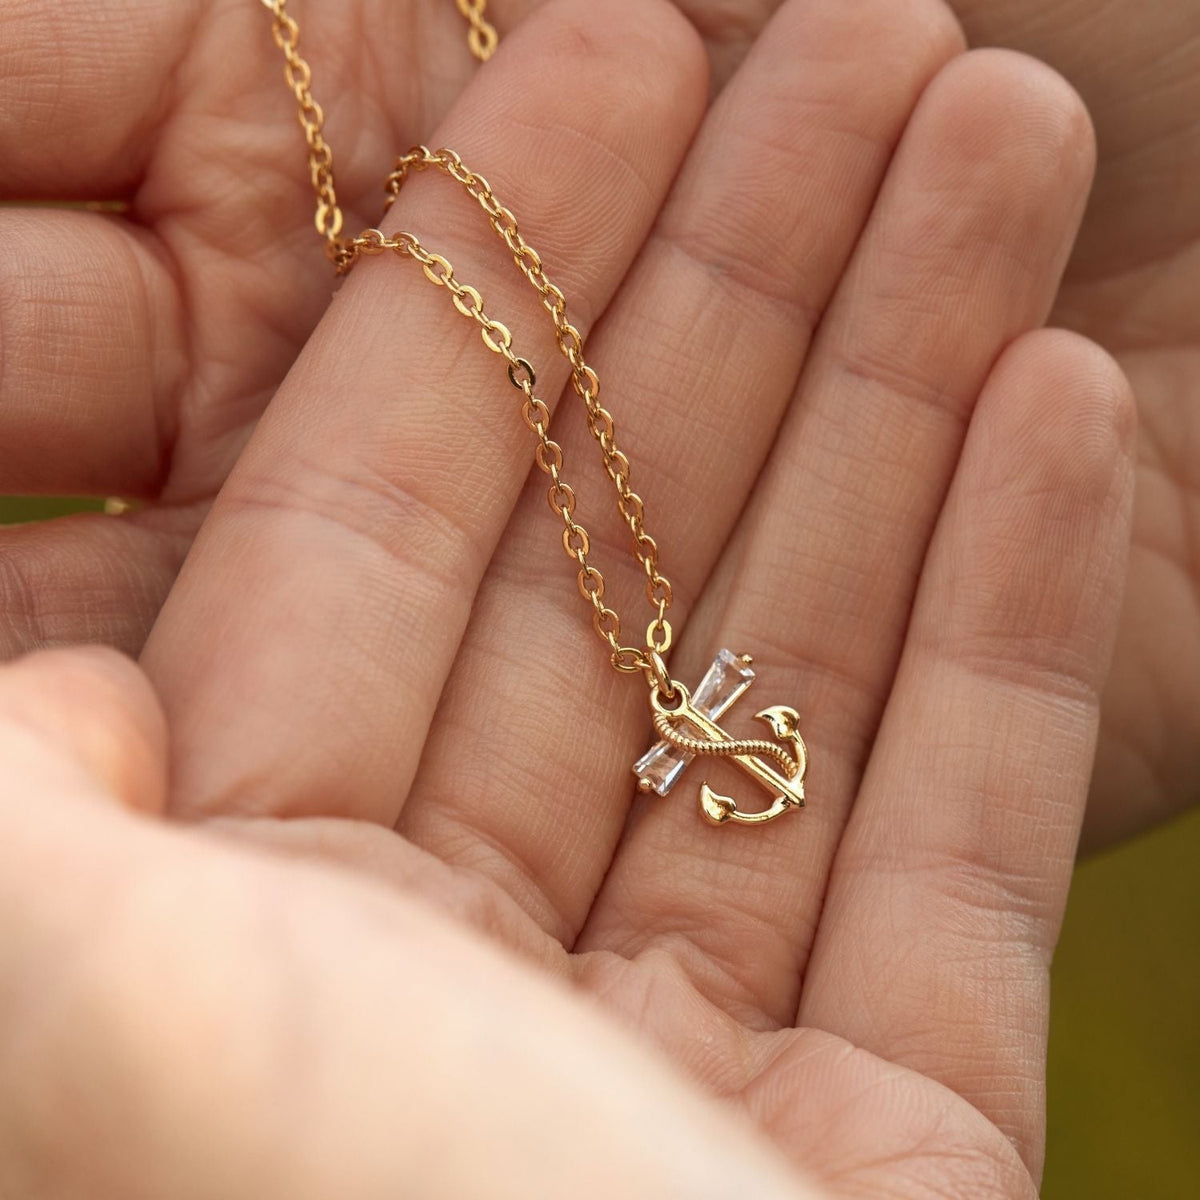 Big Sis &amp; Lil Sis | A Special Bond | Anchor Necklace